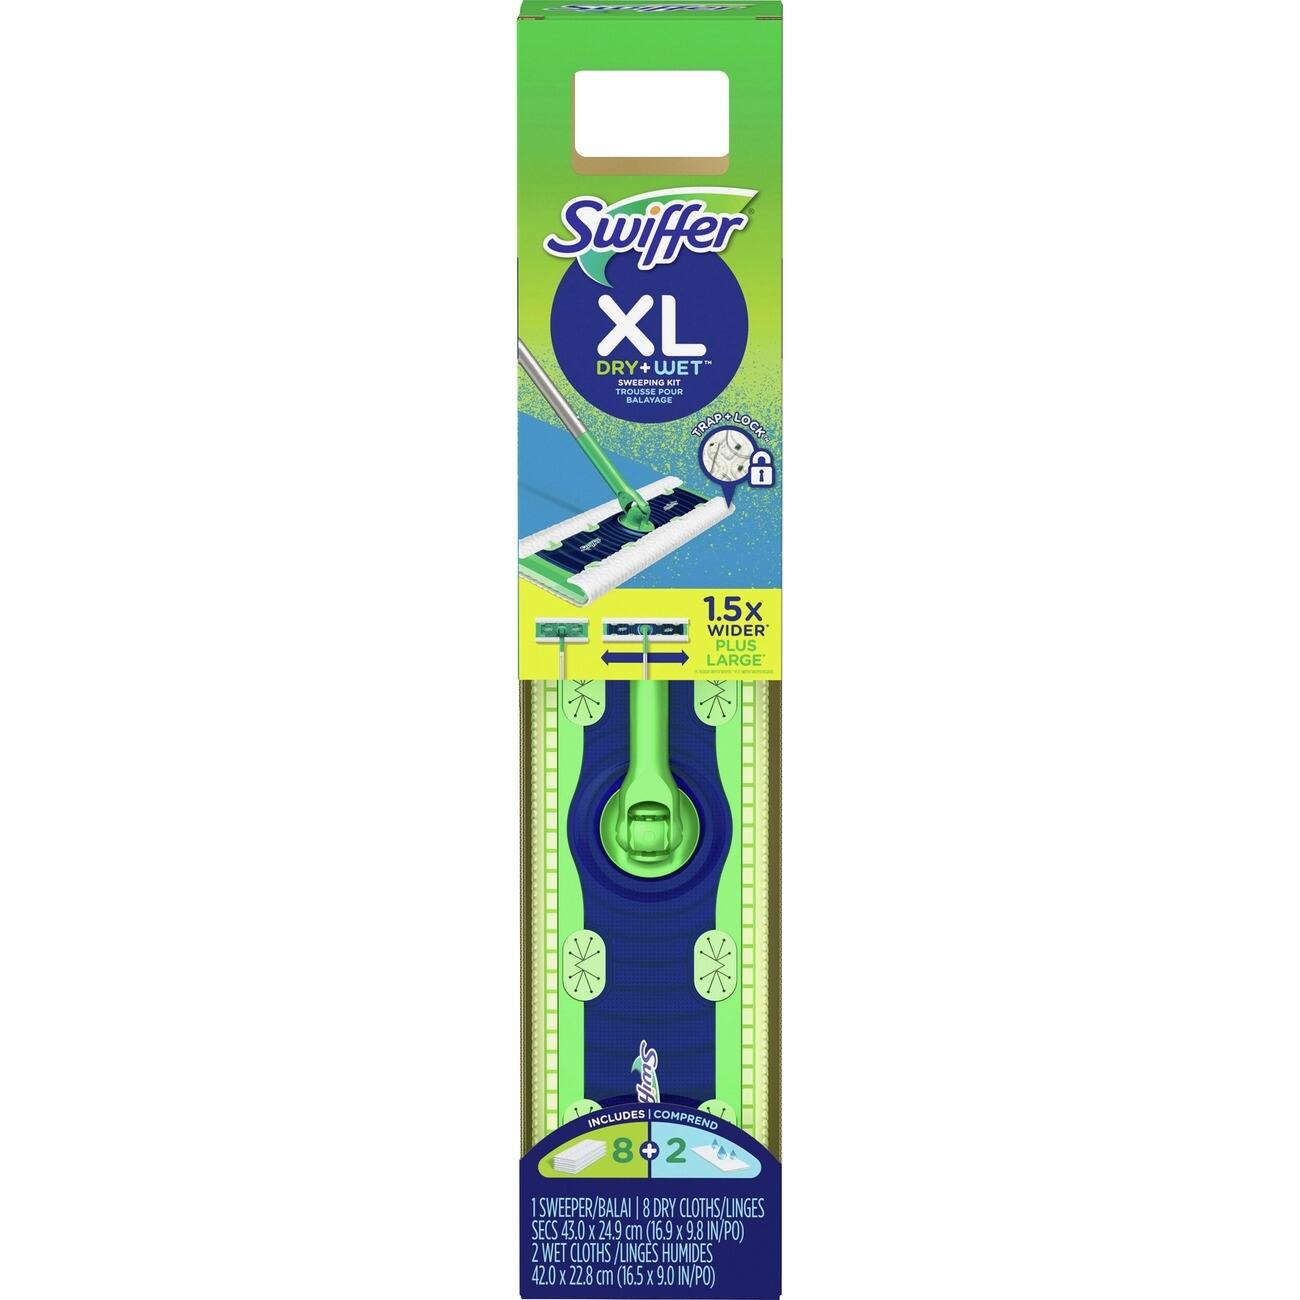 Sweeper Dry Wet XL Sweeping Kit